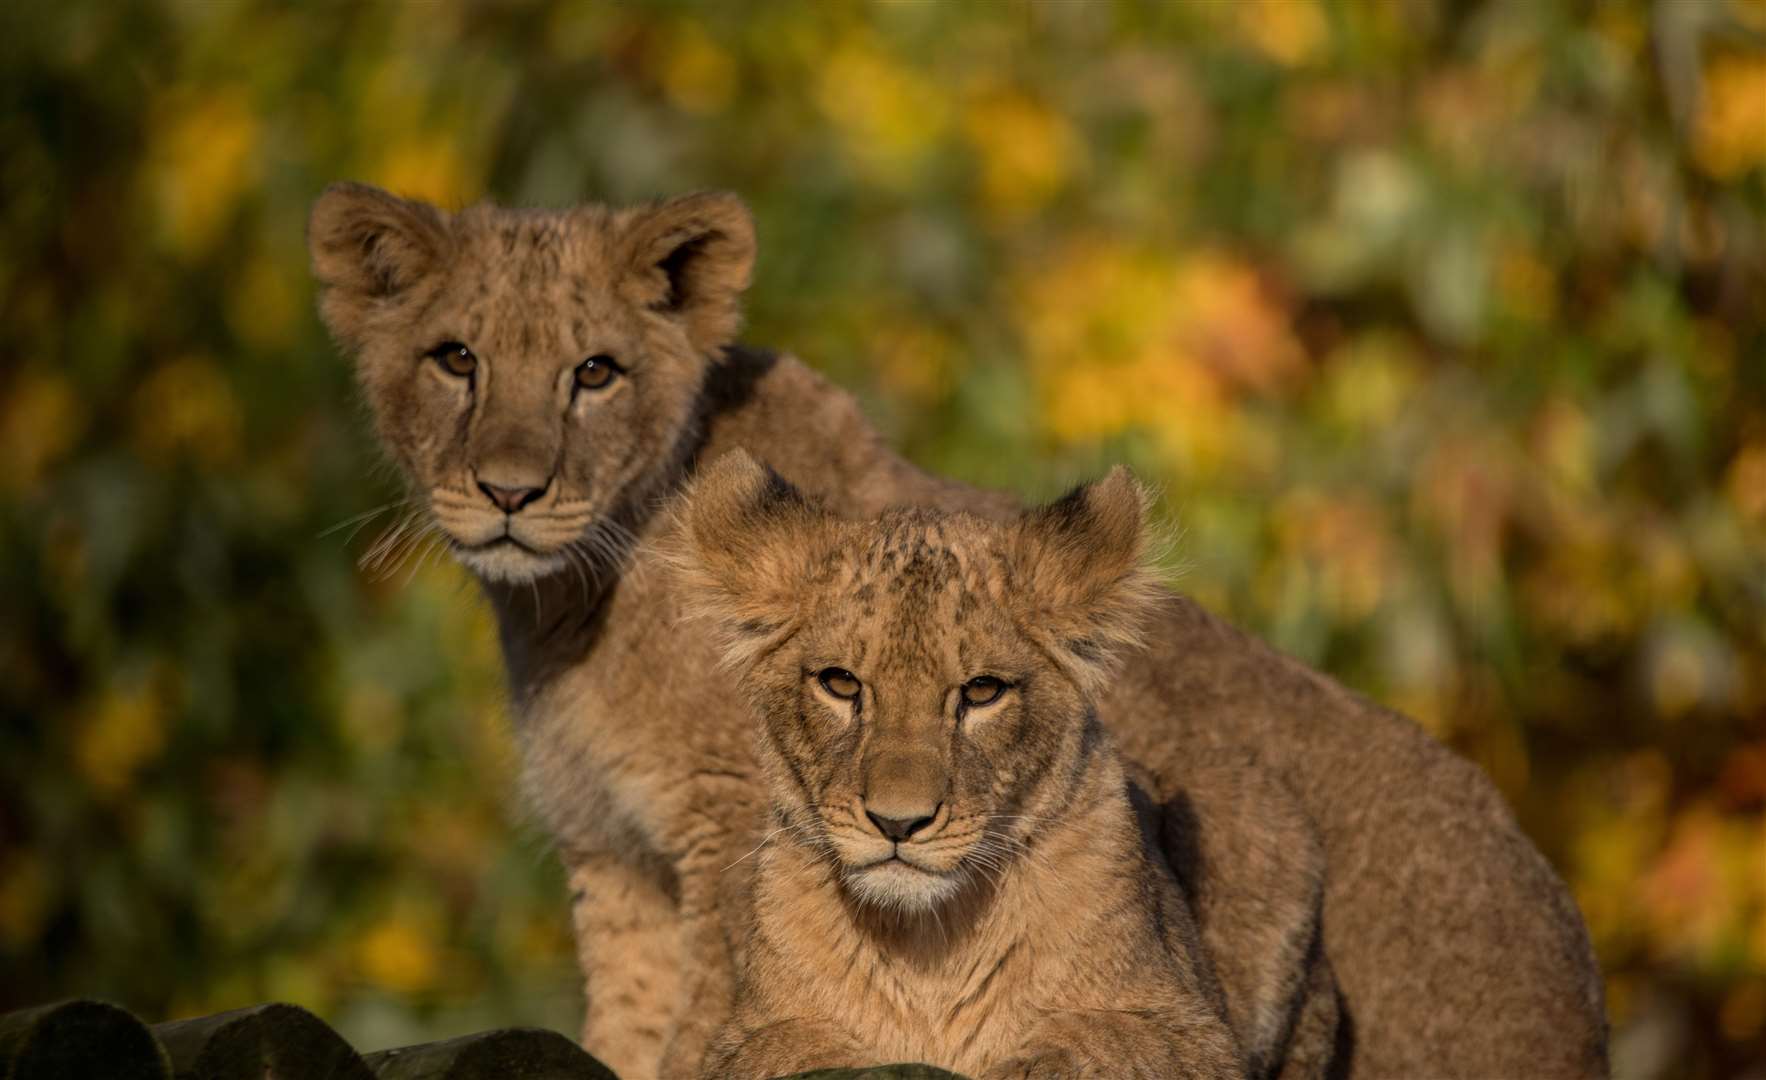 Meet big cats, elephants, gorillas and more with an animal experience at Howletts Wild Animal Park. Picture: @photography_by_dmc